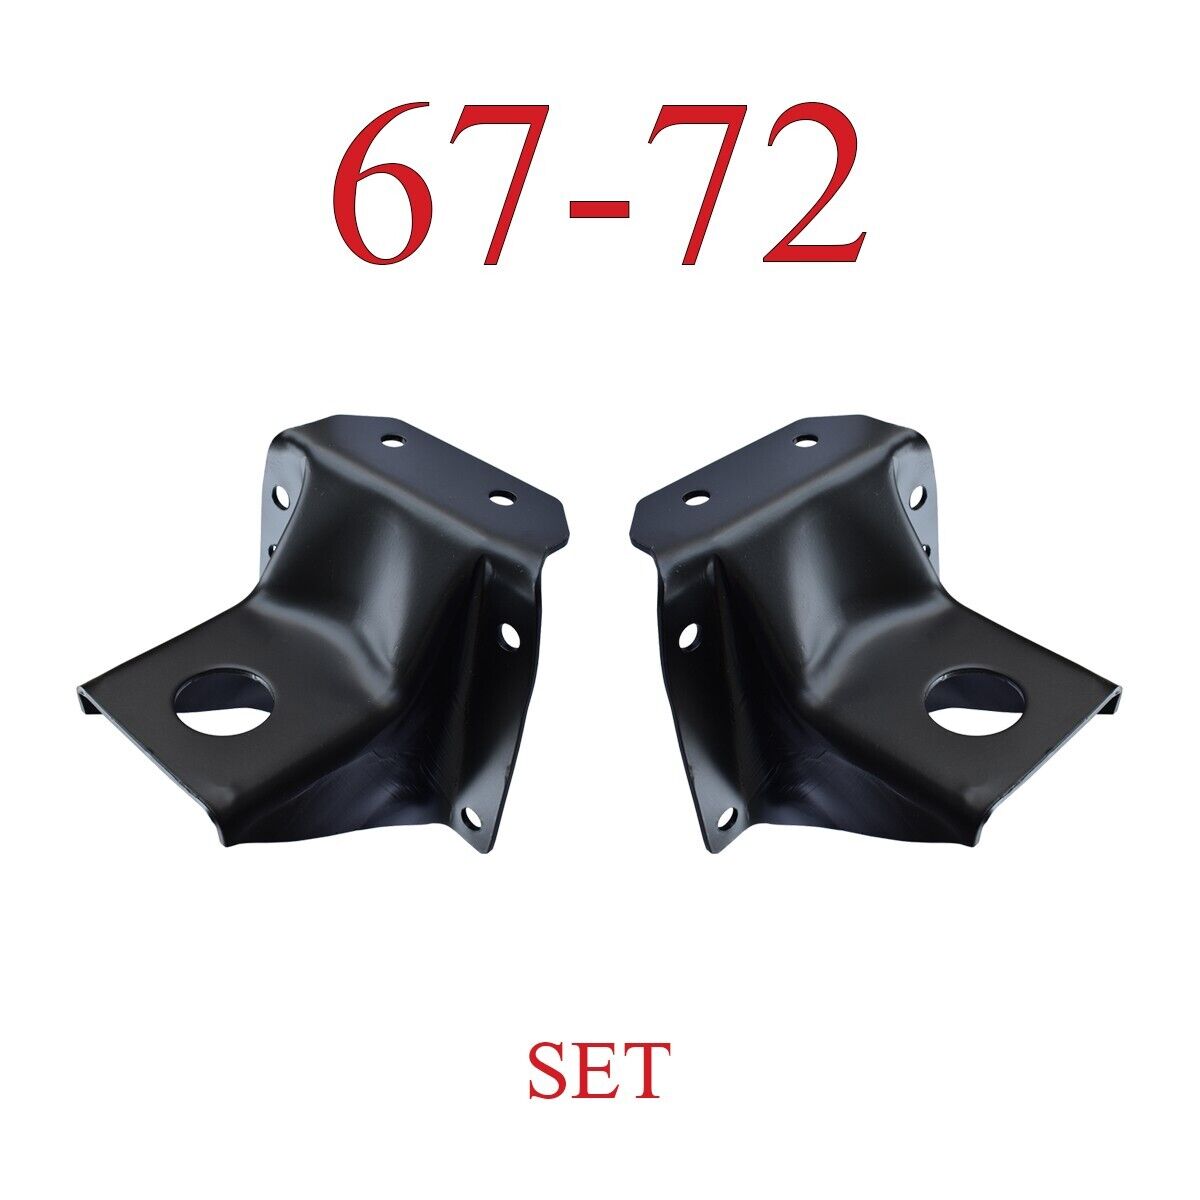 67 72 Chevy Front Frame Side, Cab Mount Perch Set, GMC, 0849-415